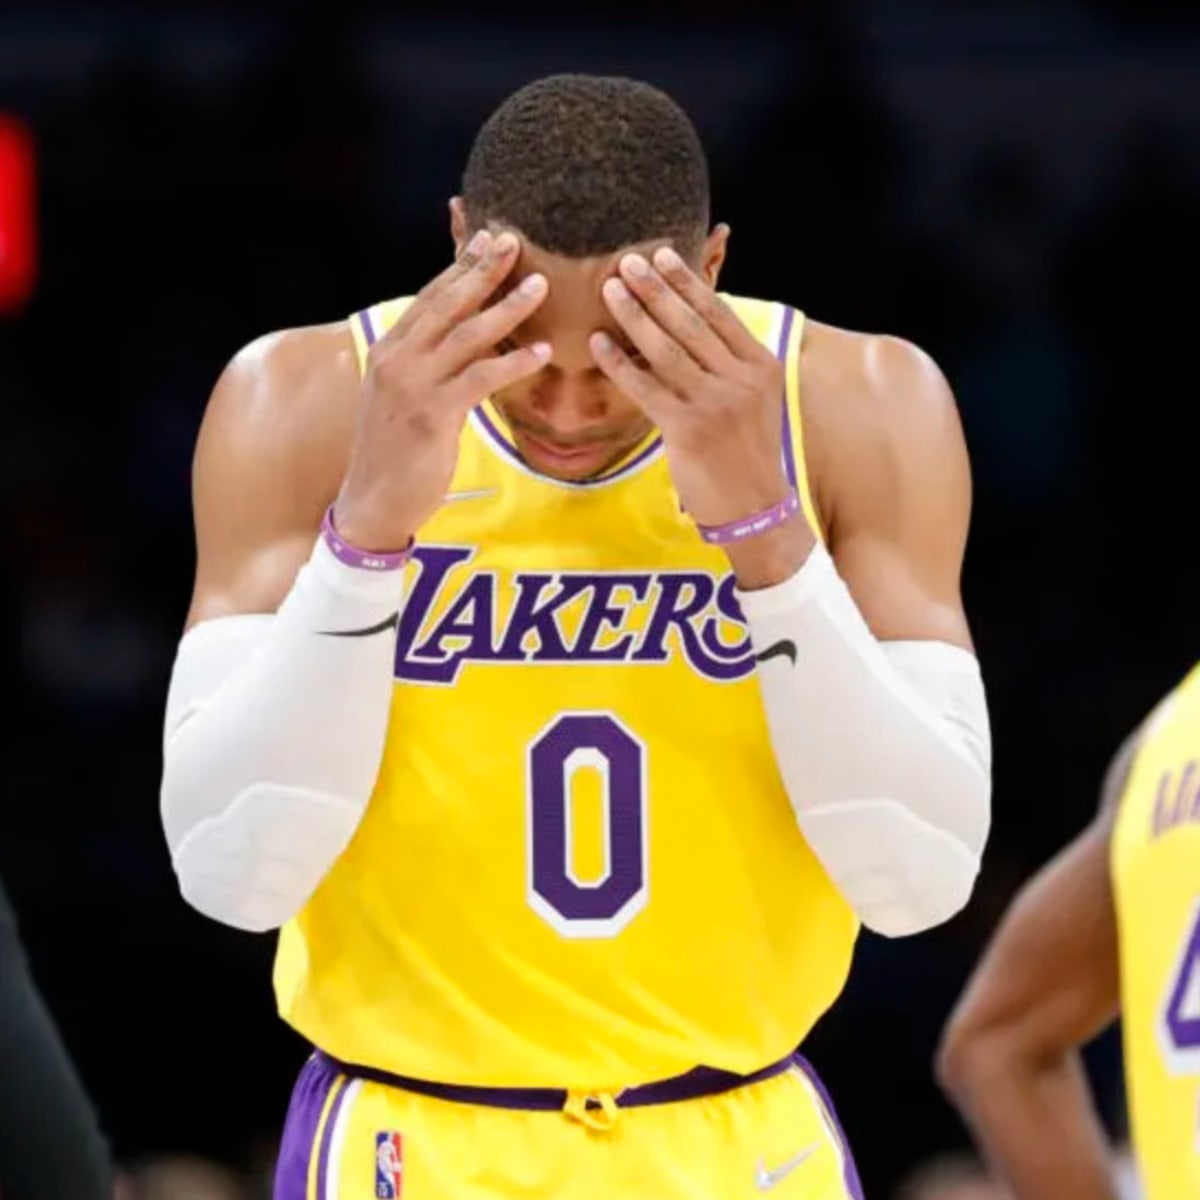 Russell Westbrook's contract: How much are the Lakers paying the